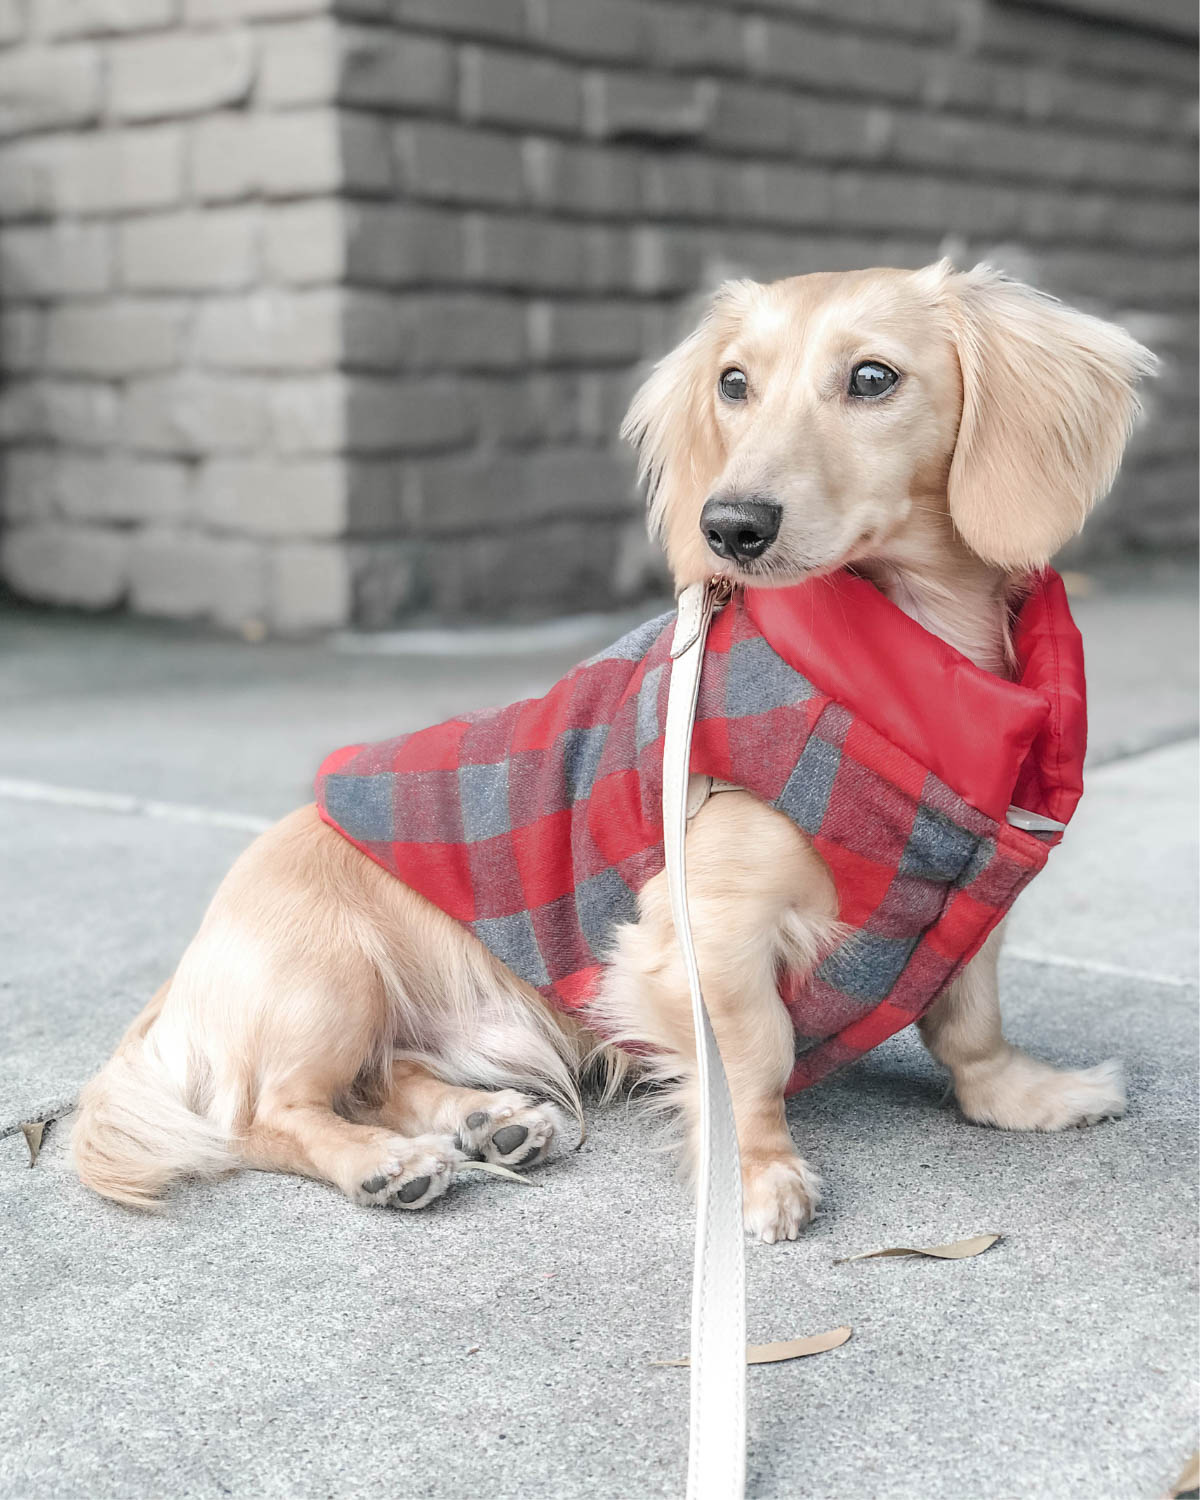 DJANGO's Reversible Puffer is a best selling winter dog coat featuring a water-repellent exterior and super cozy and plush interior lining. The spacious, easy-access leash portal, adjustable hem, and oversized armholes make this a favorite dog coat for cold weather adventures. Watson is a mini dachshund and wears size small.- djangobrand.com